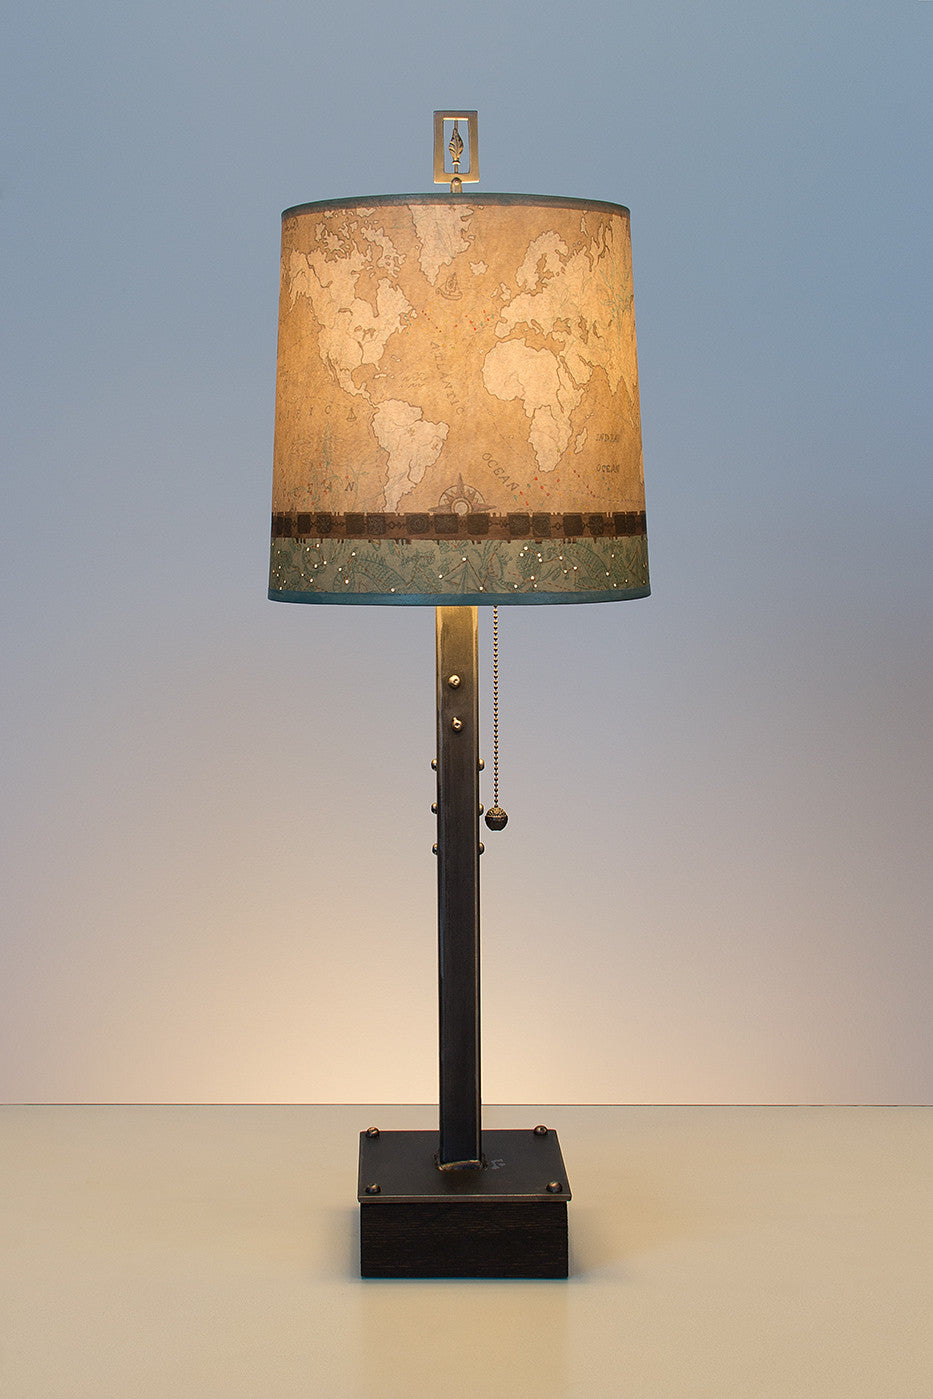 Steel Table Lamp on Wood with Medium Drum Shade in Voyages